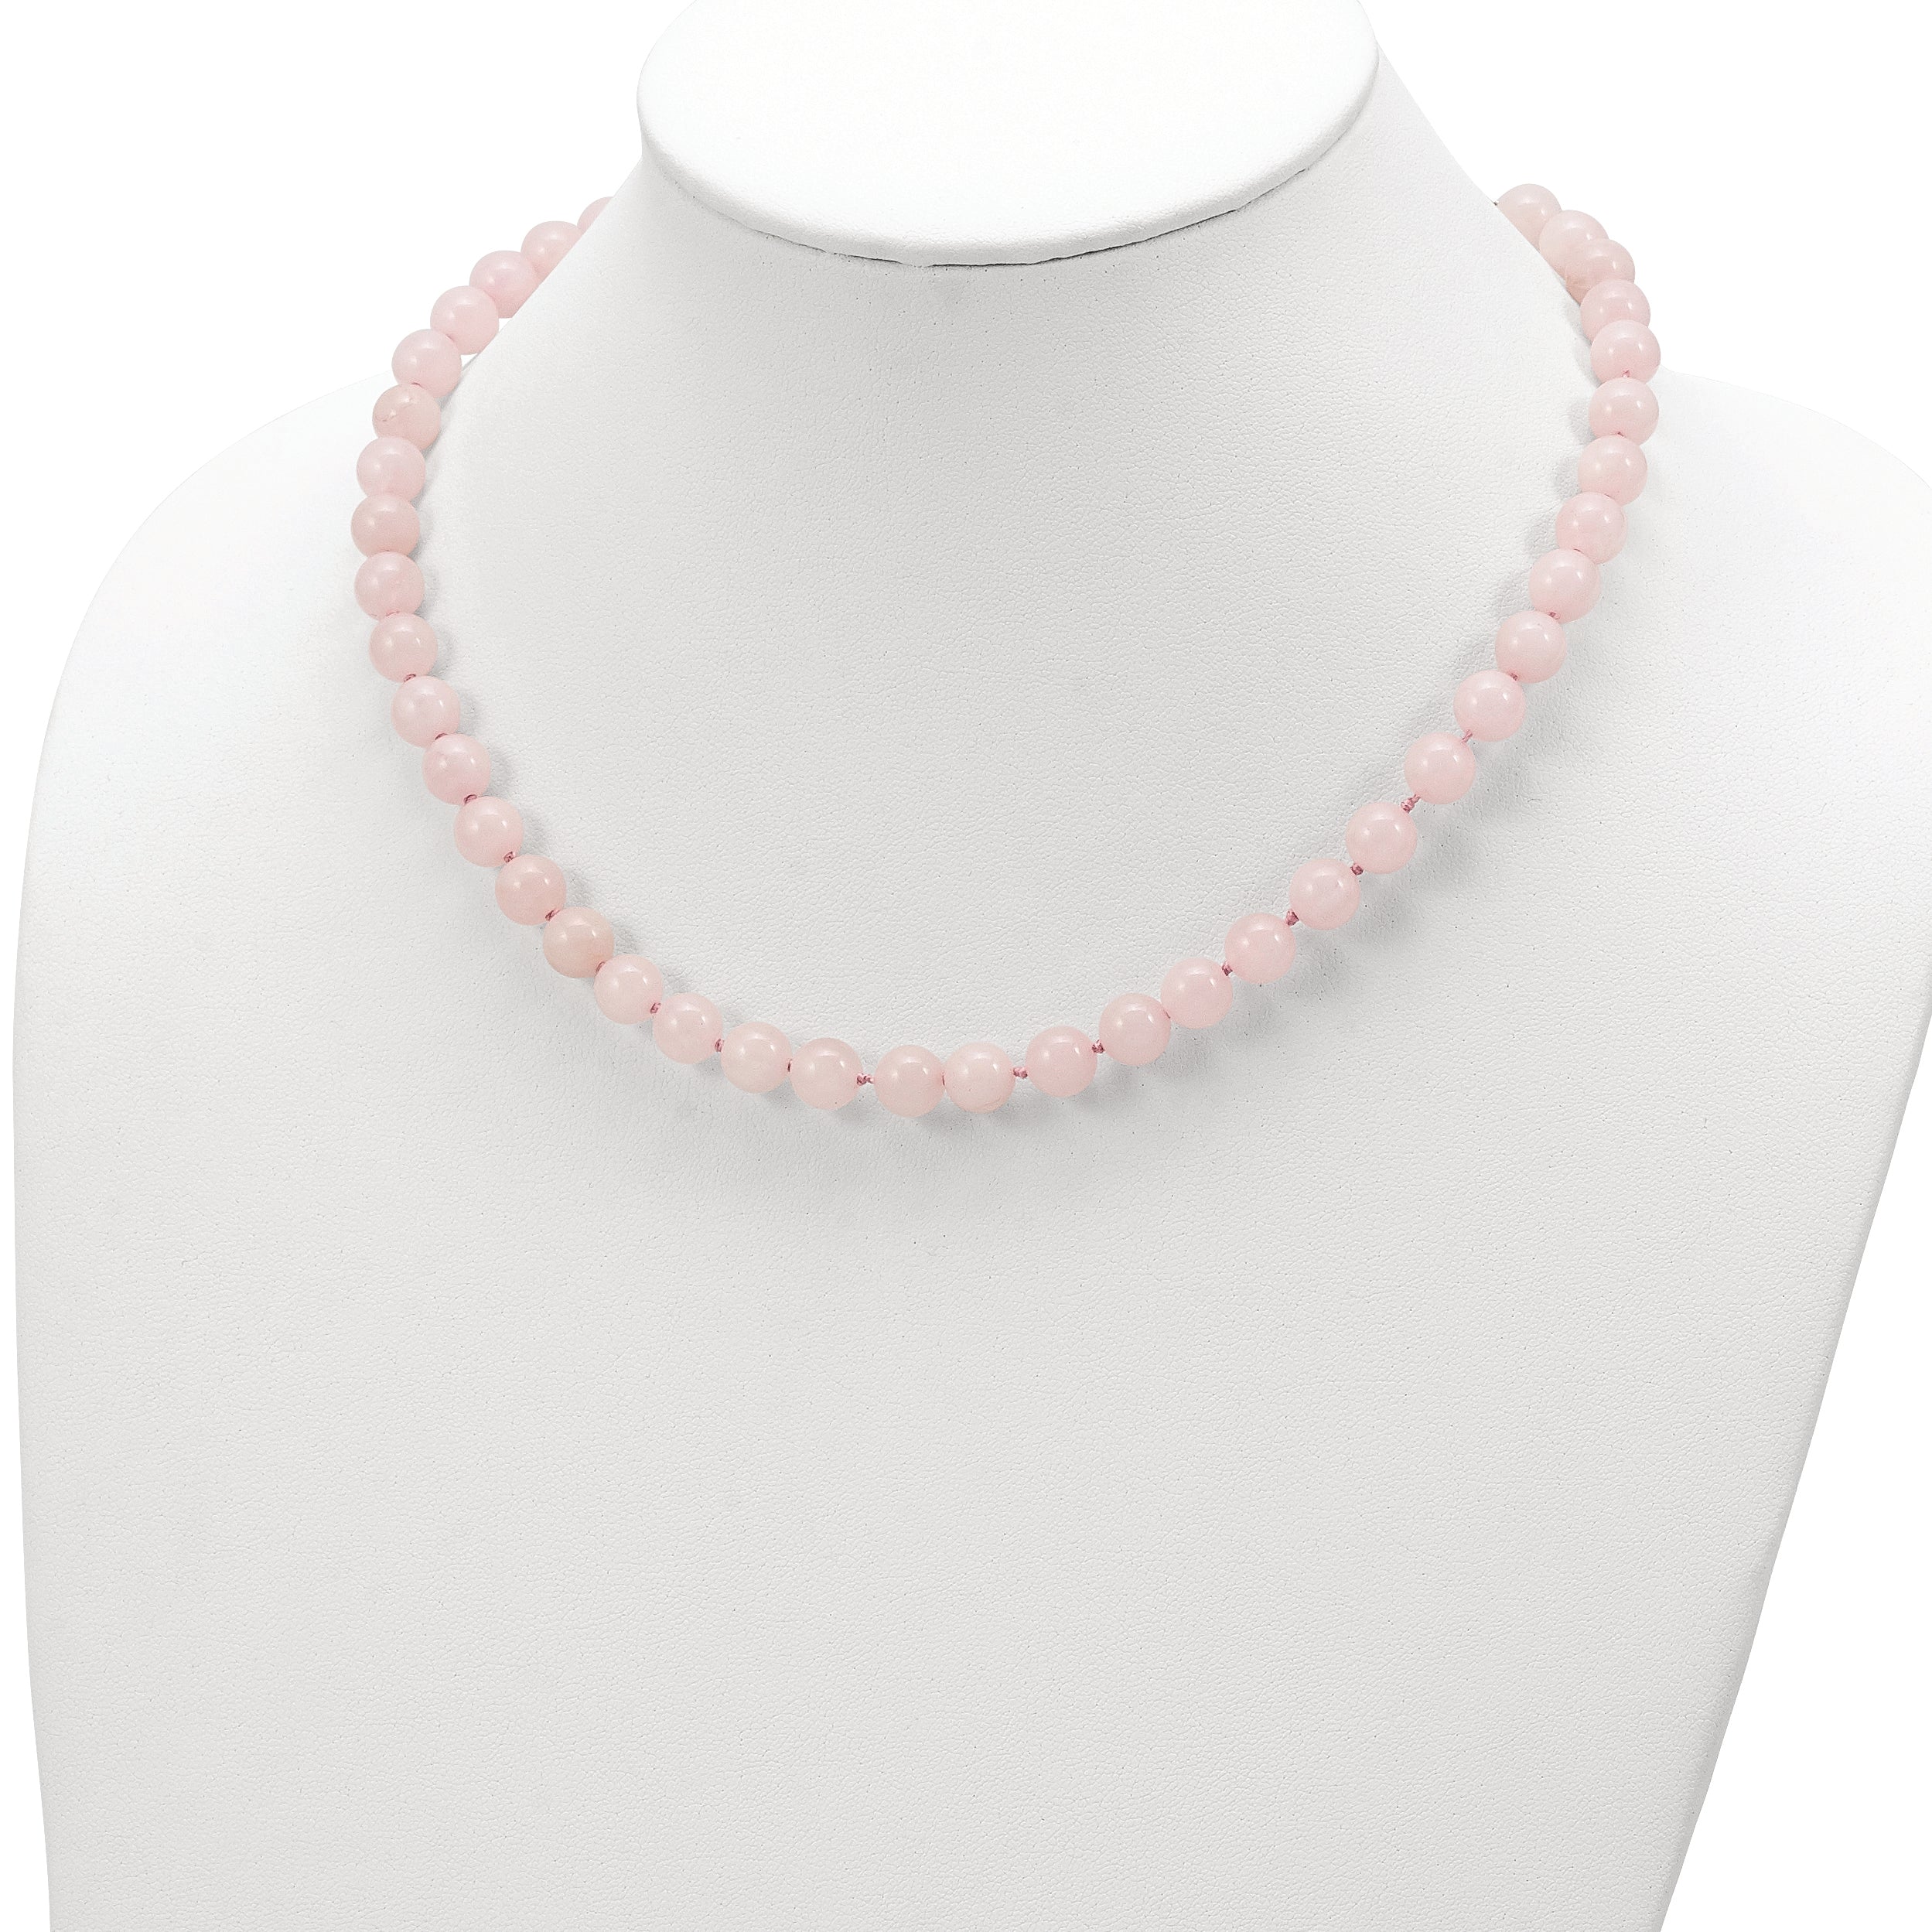 8-8.5mm Smooth Beaded Rose Quartz Necklace w/Sterling S.RH Clasp